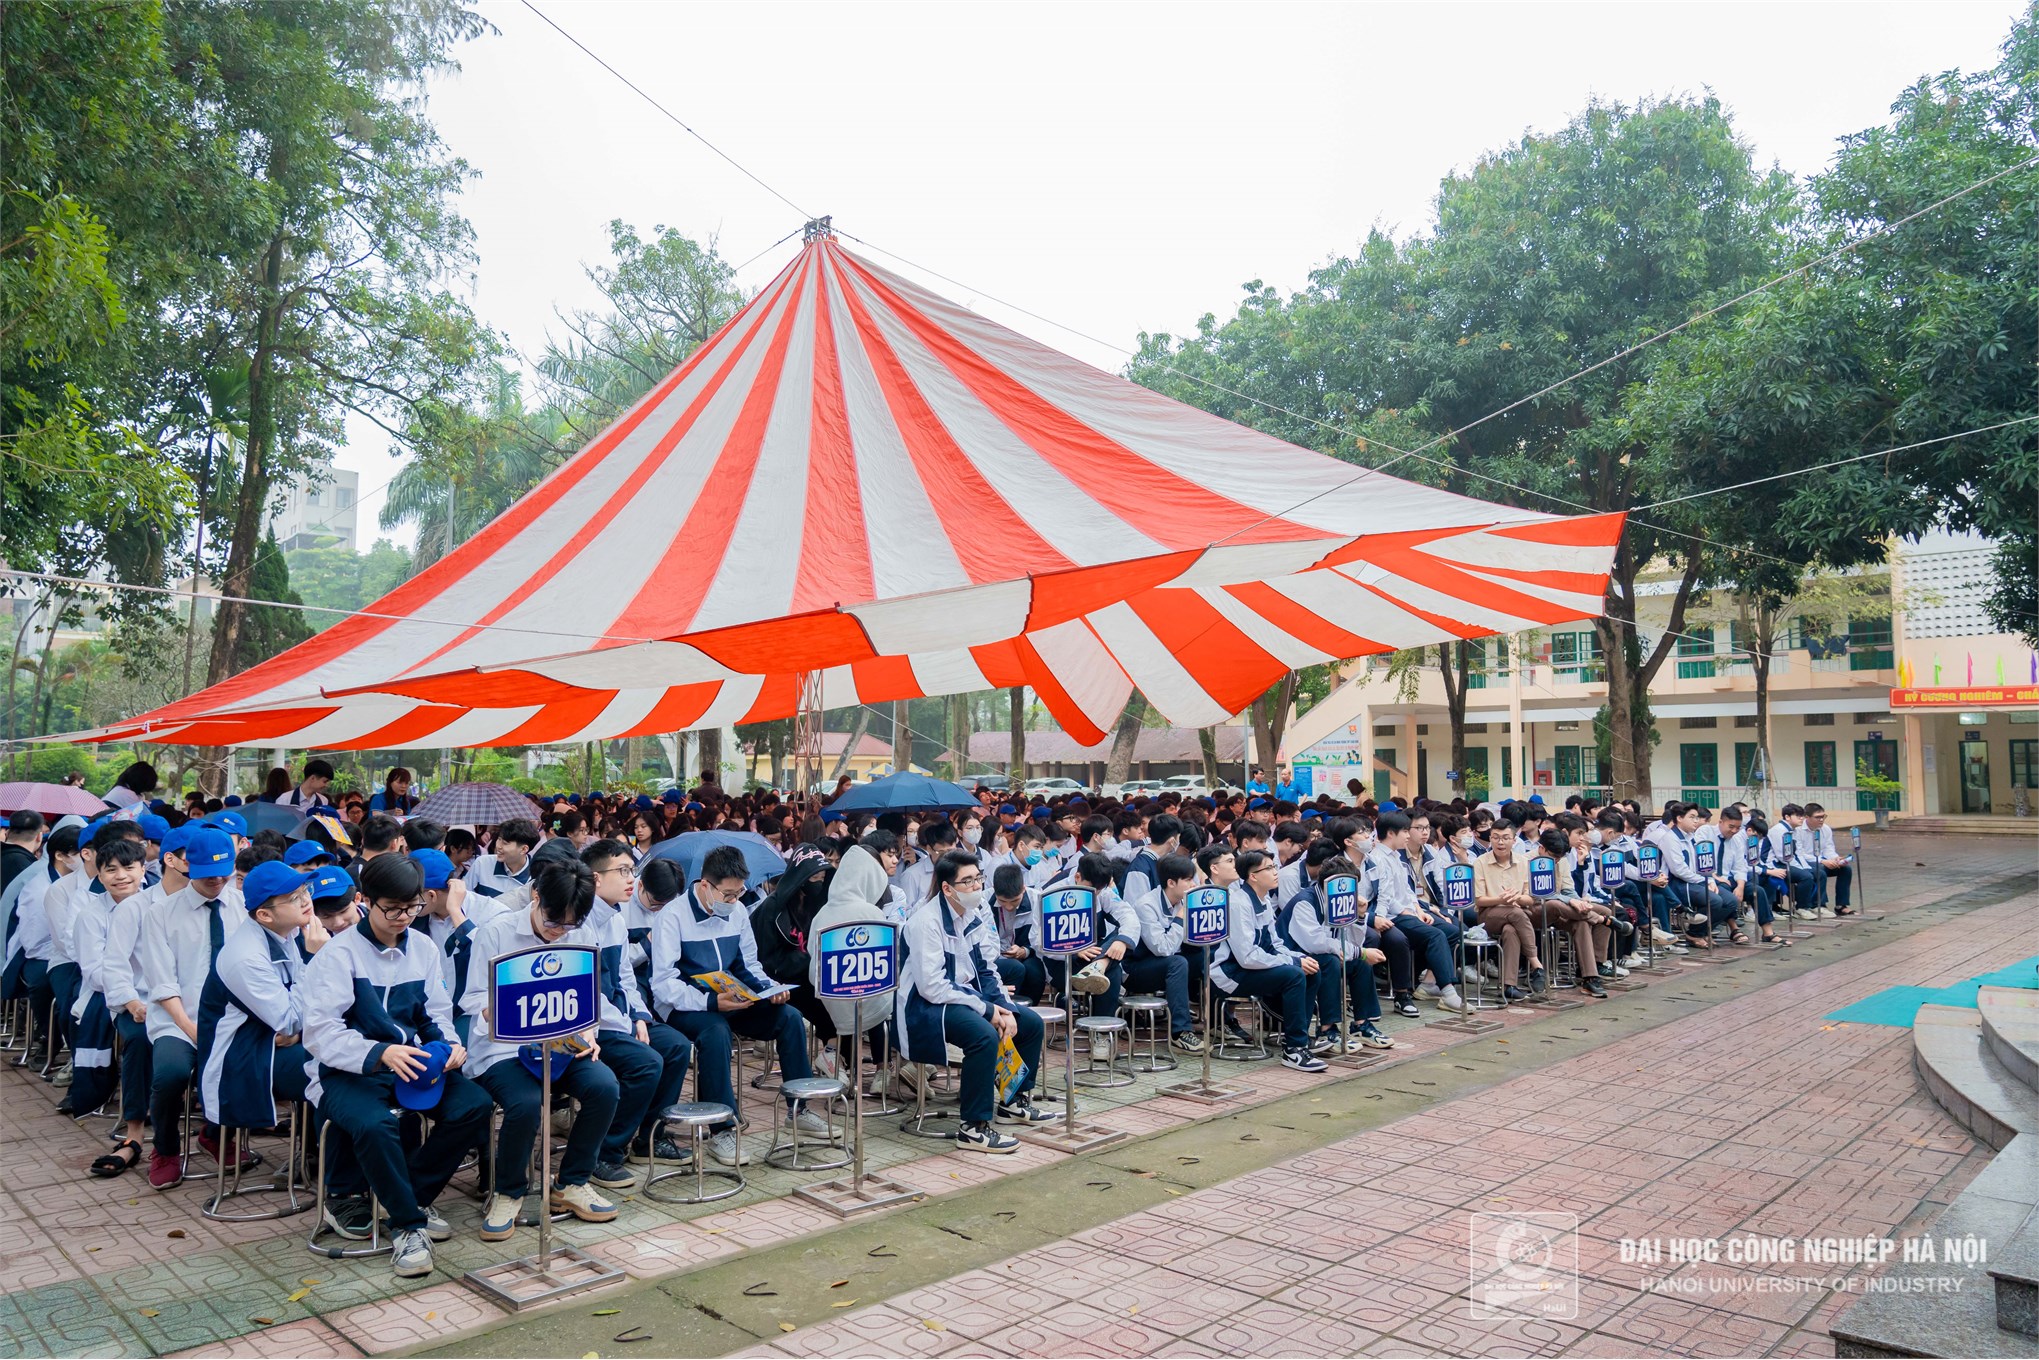 Hanoi University of Industry Supports Xuan Dinh High School Students in Admission Journey